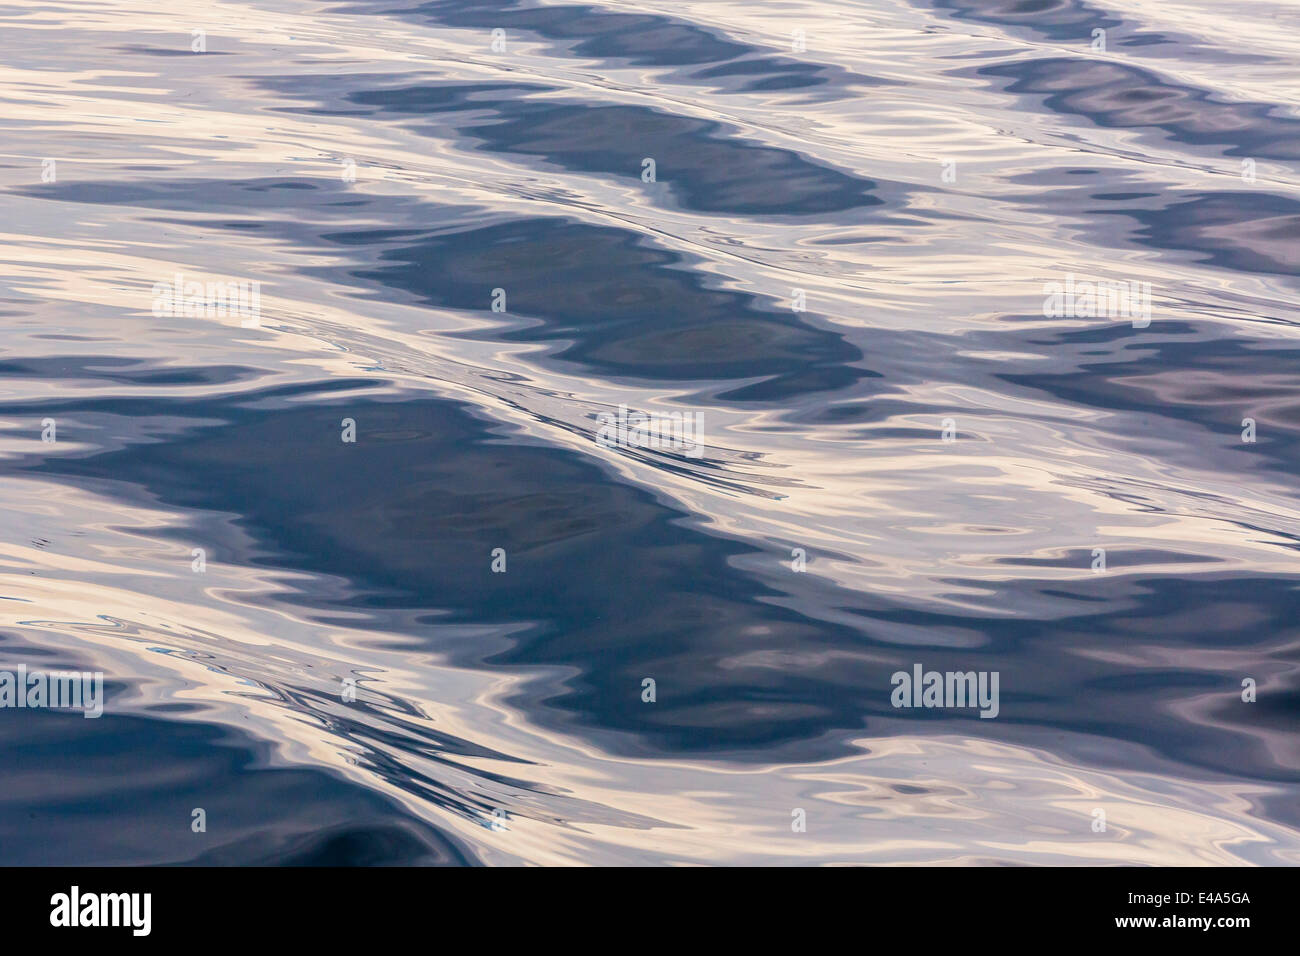 Reflections from ships wake in the sea near the town of Ilulissat, Greenland, Polar Regions Stock Photo